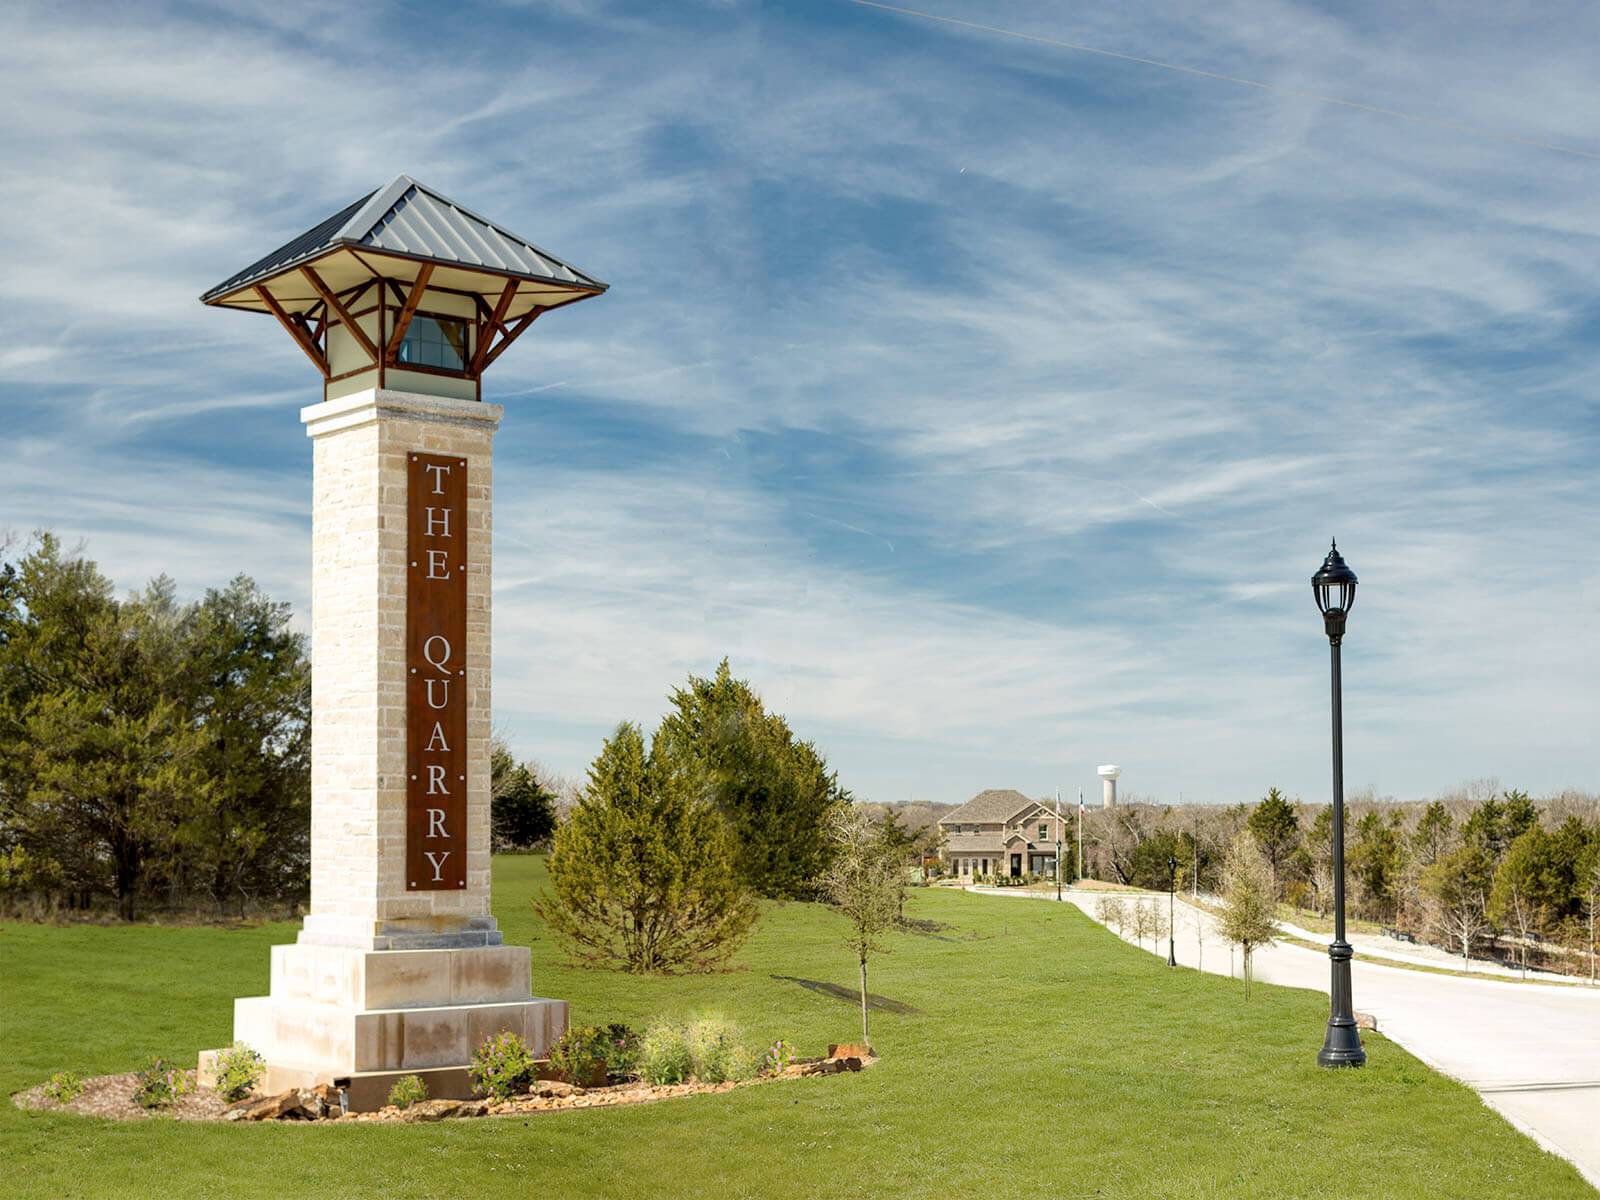 Find your perfect home at The Quarry at Stoneridge.